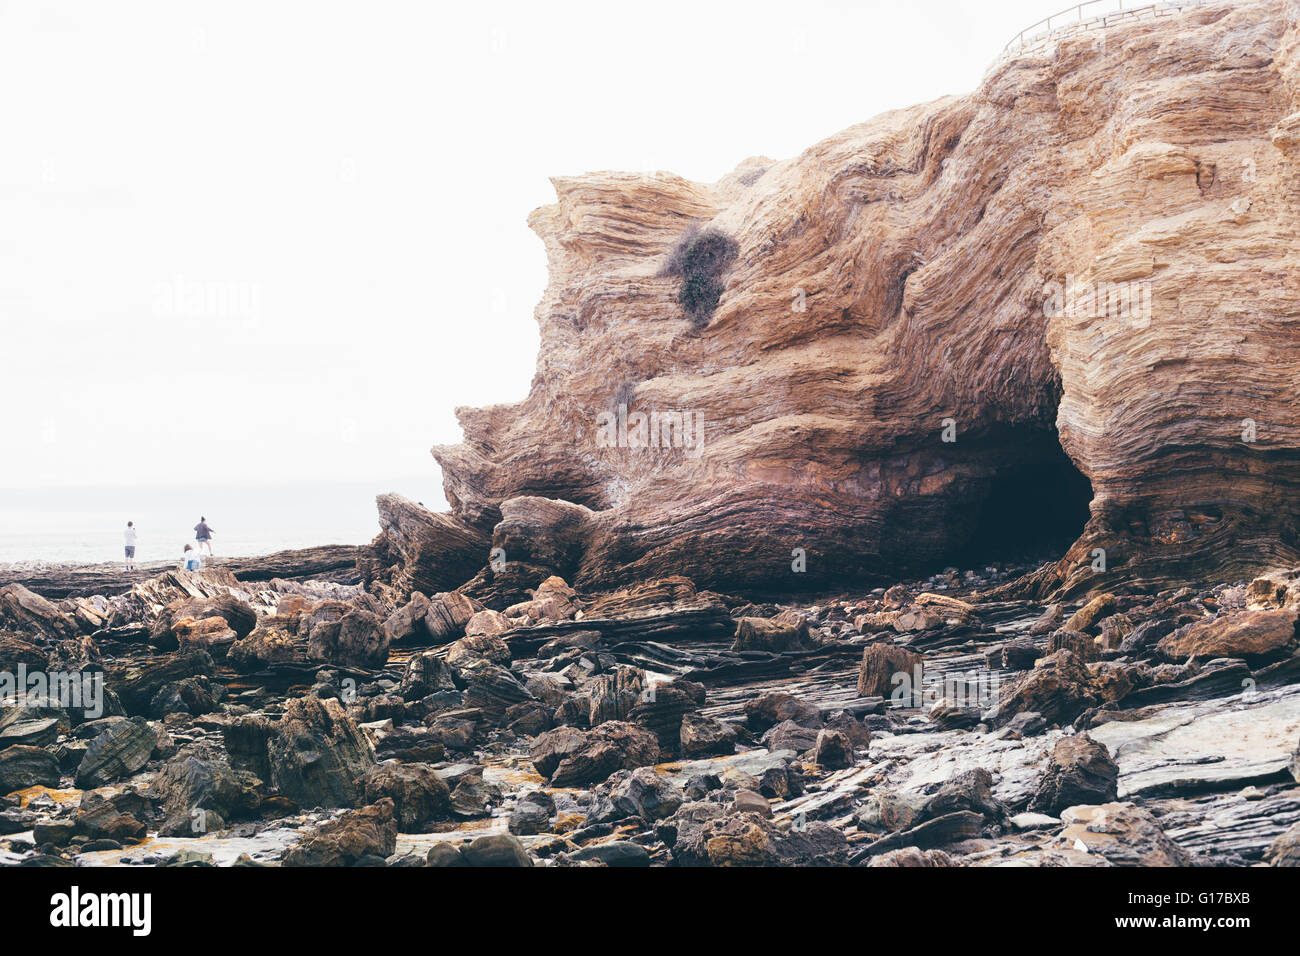 Distant view of people on rocky beach, Crystal Cove State Park, Laguna Beach, California, USA Stock Photo